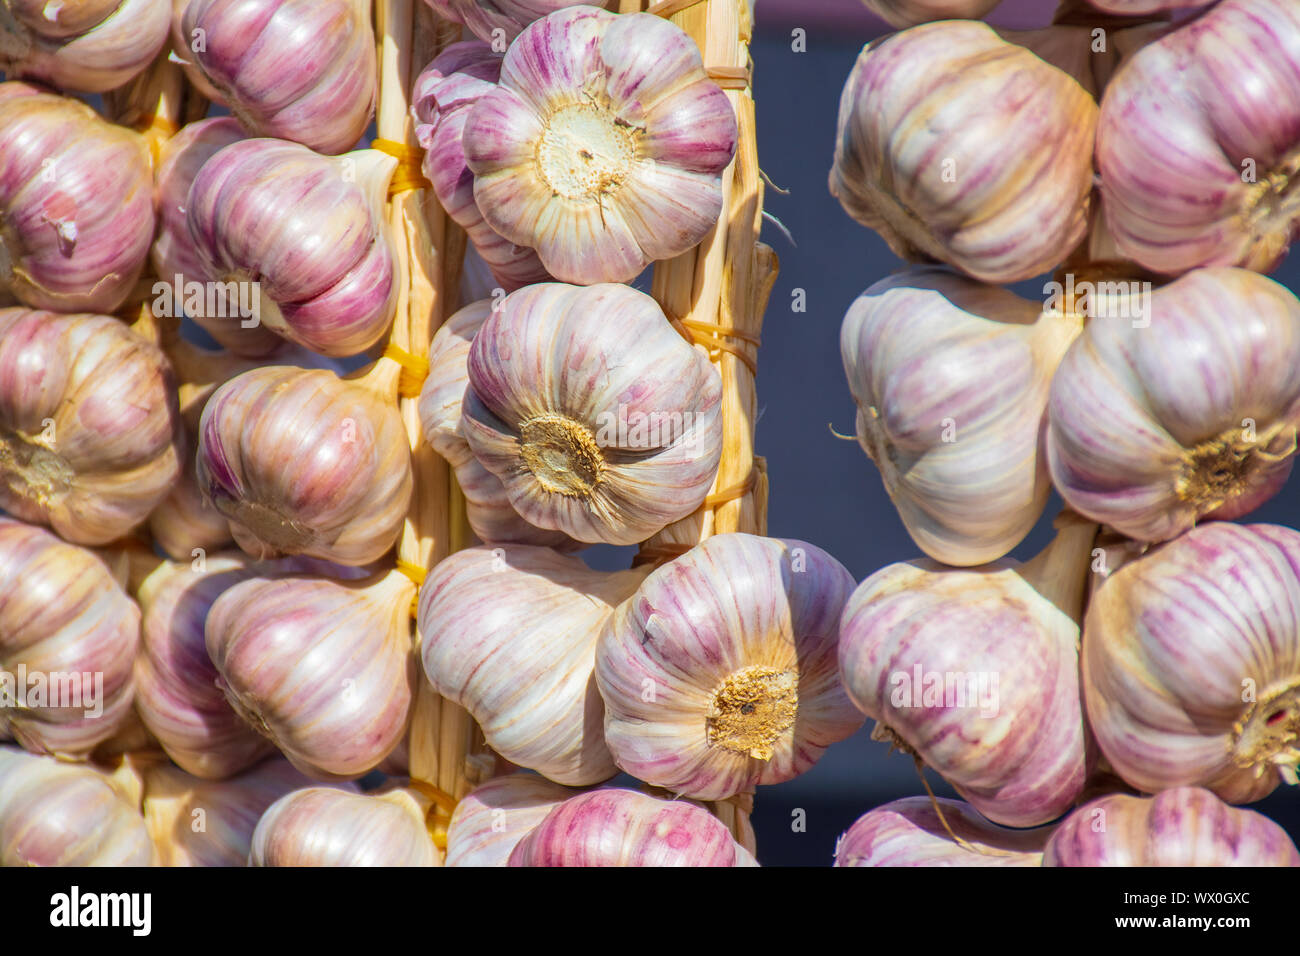 Red garlic hanging on farmer's market stall. White and purple red color heads, bits of roots, stems Stock Photo